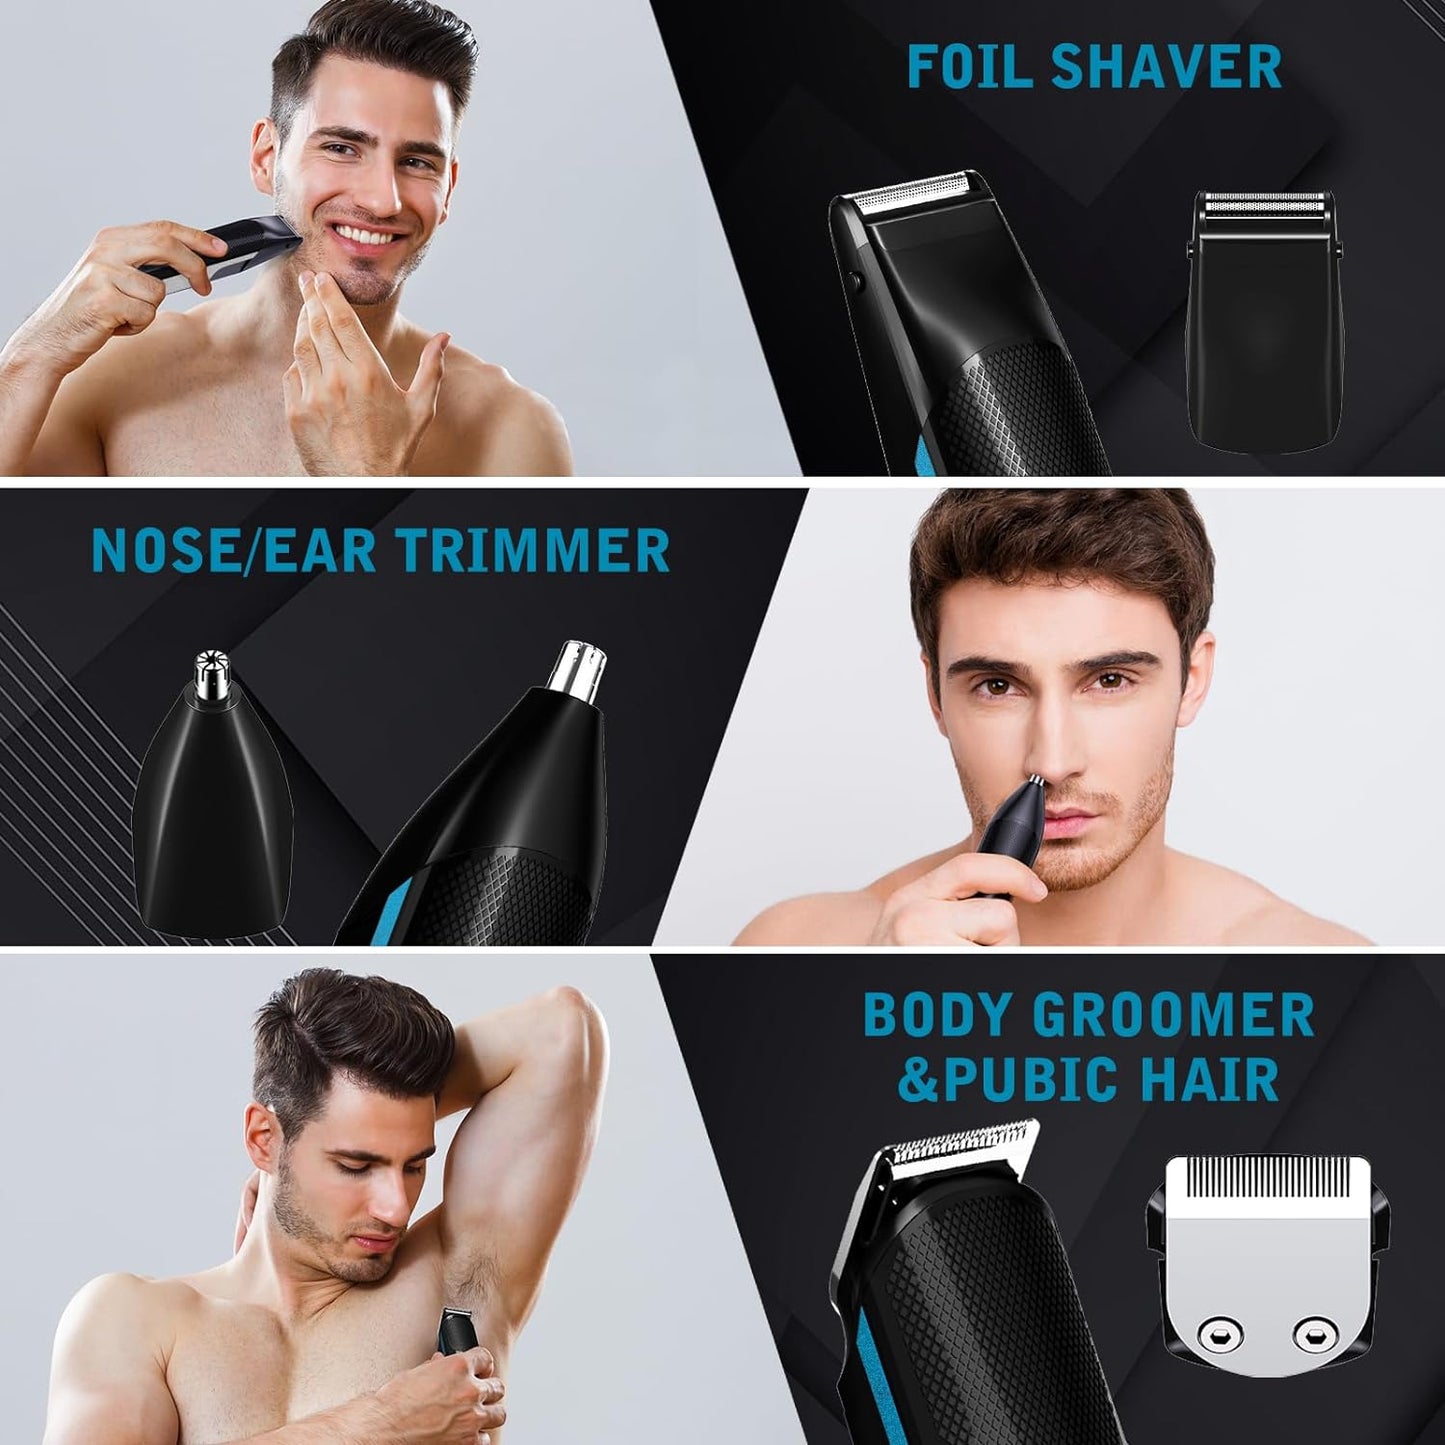 FADEKING® All-in-One Beard Trimmer with Adjustable Combs - Waterproof Trimmer for Men, Hair Clippers, Nose Trimmer, Electric Razor Shaver for Mustache Nose Body Face Grooming, Gifts for Men （blue）